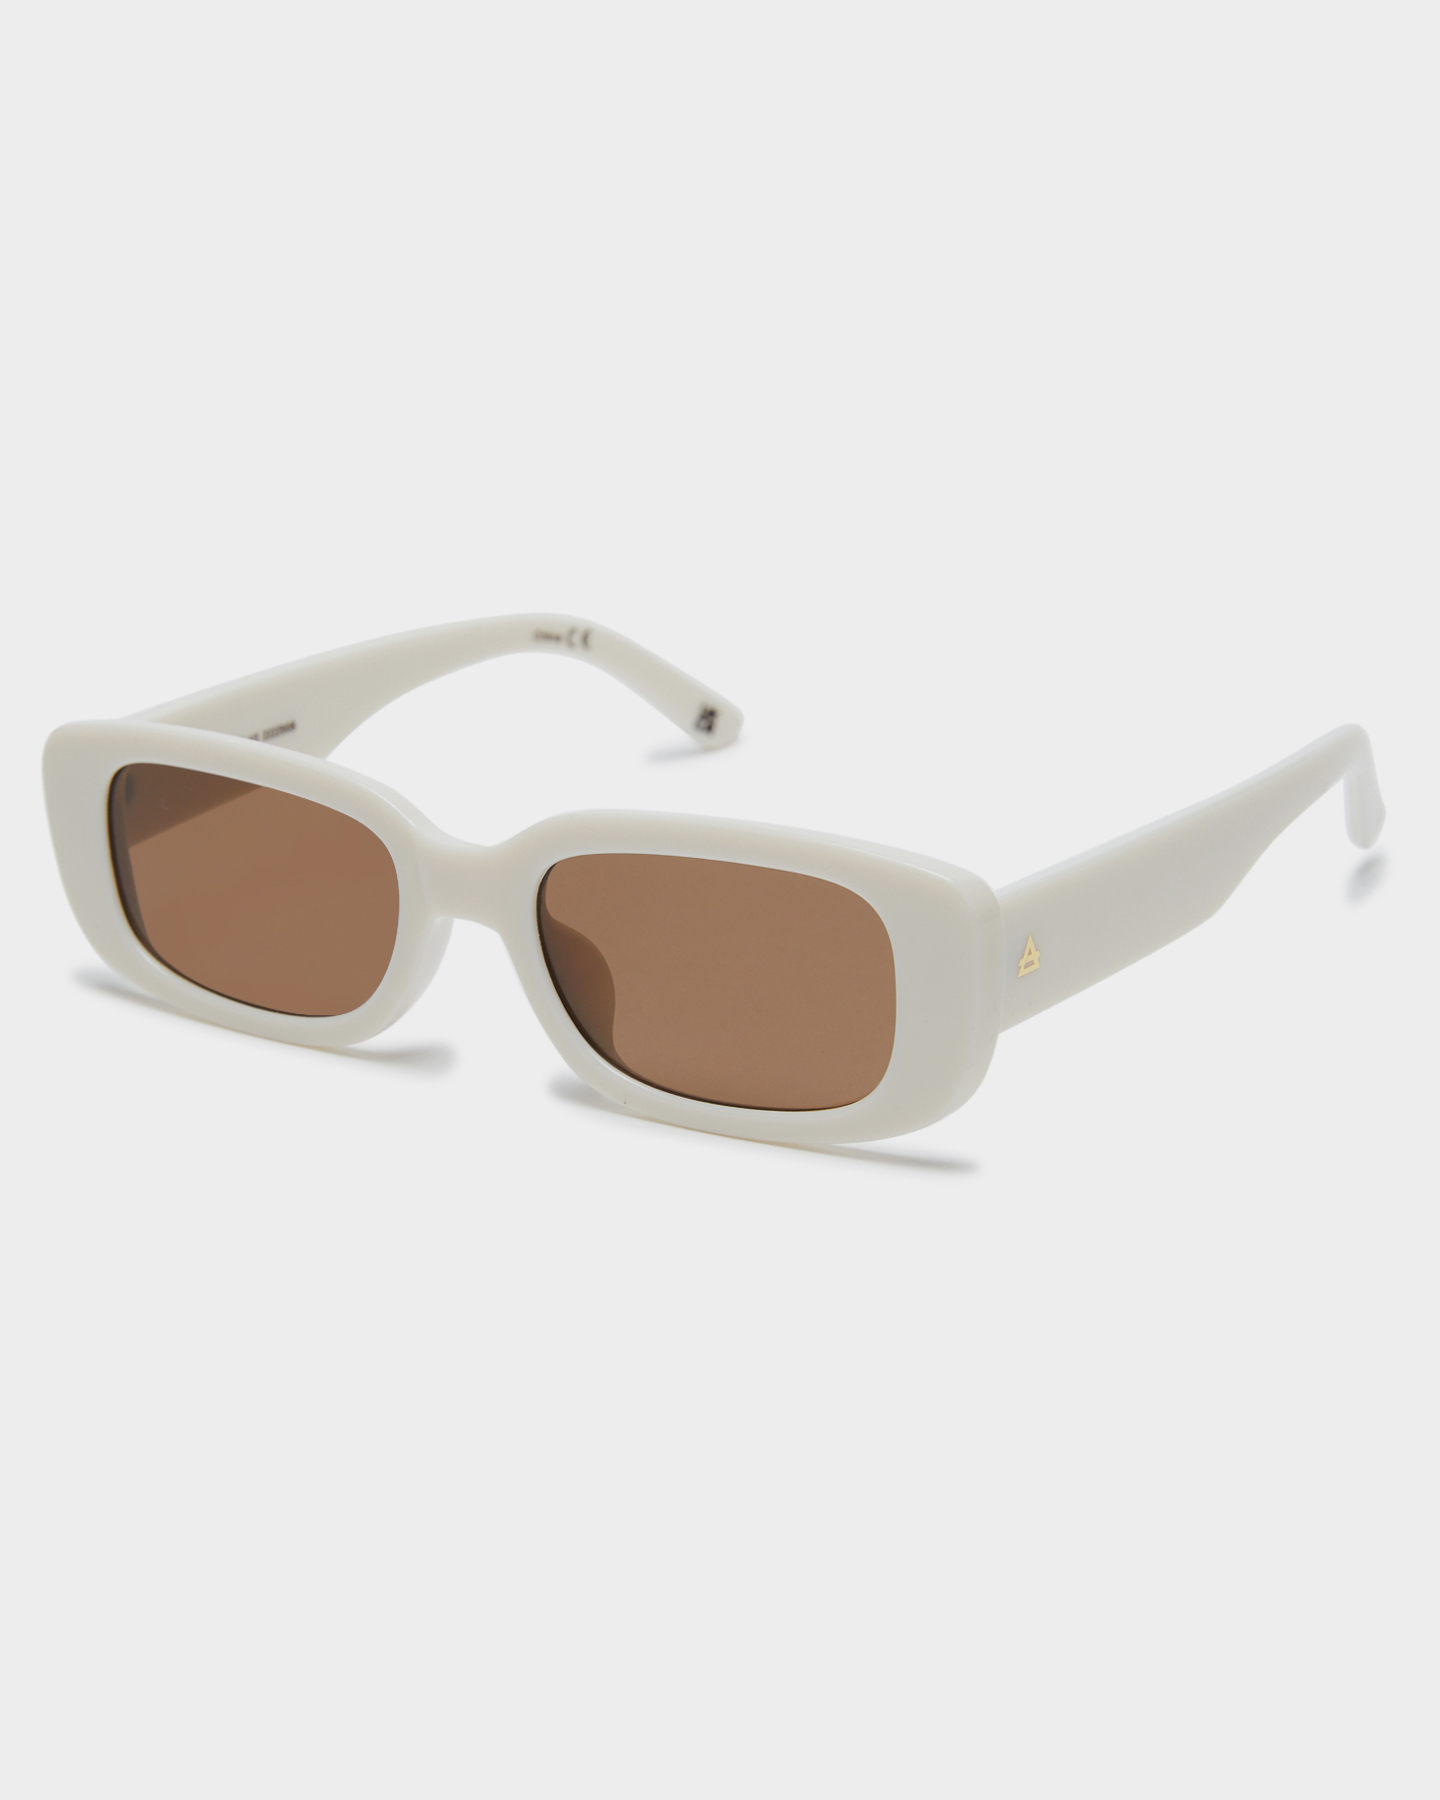 Aire Ceres V2 Sunglasses - Ivory | SurfStitch